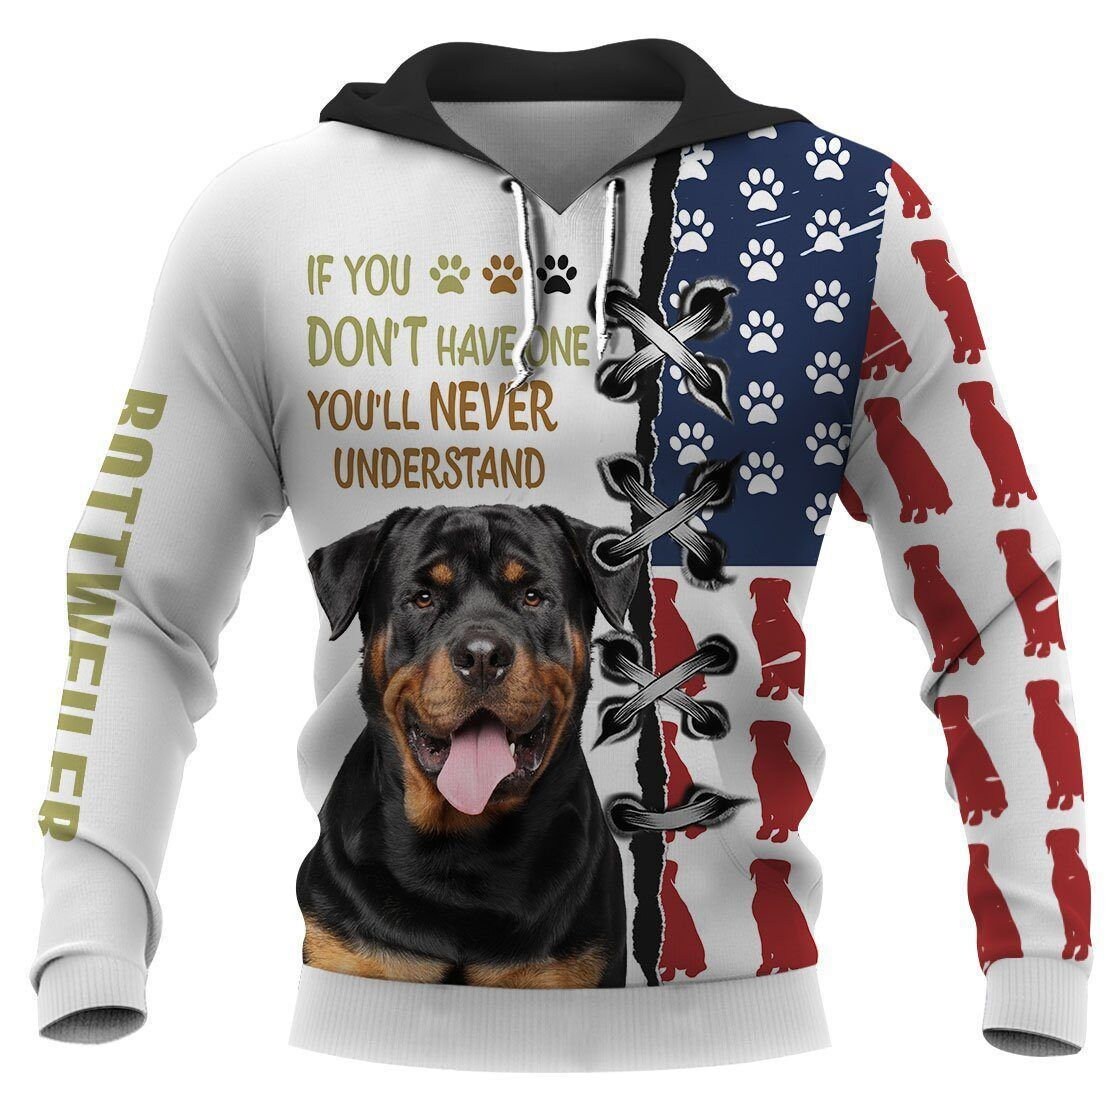 Rottweiler Dog 3D All Over Print Pullover Hoodie, 3D Hoodie For Men, If You Don't Have One You'll Never Unserstand